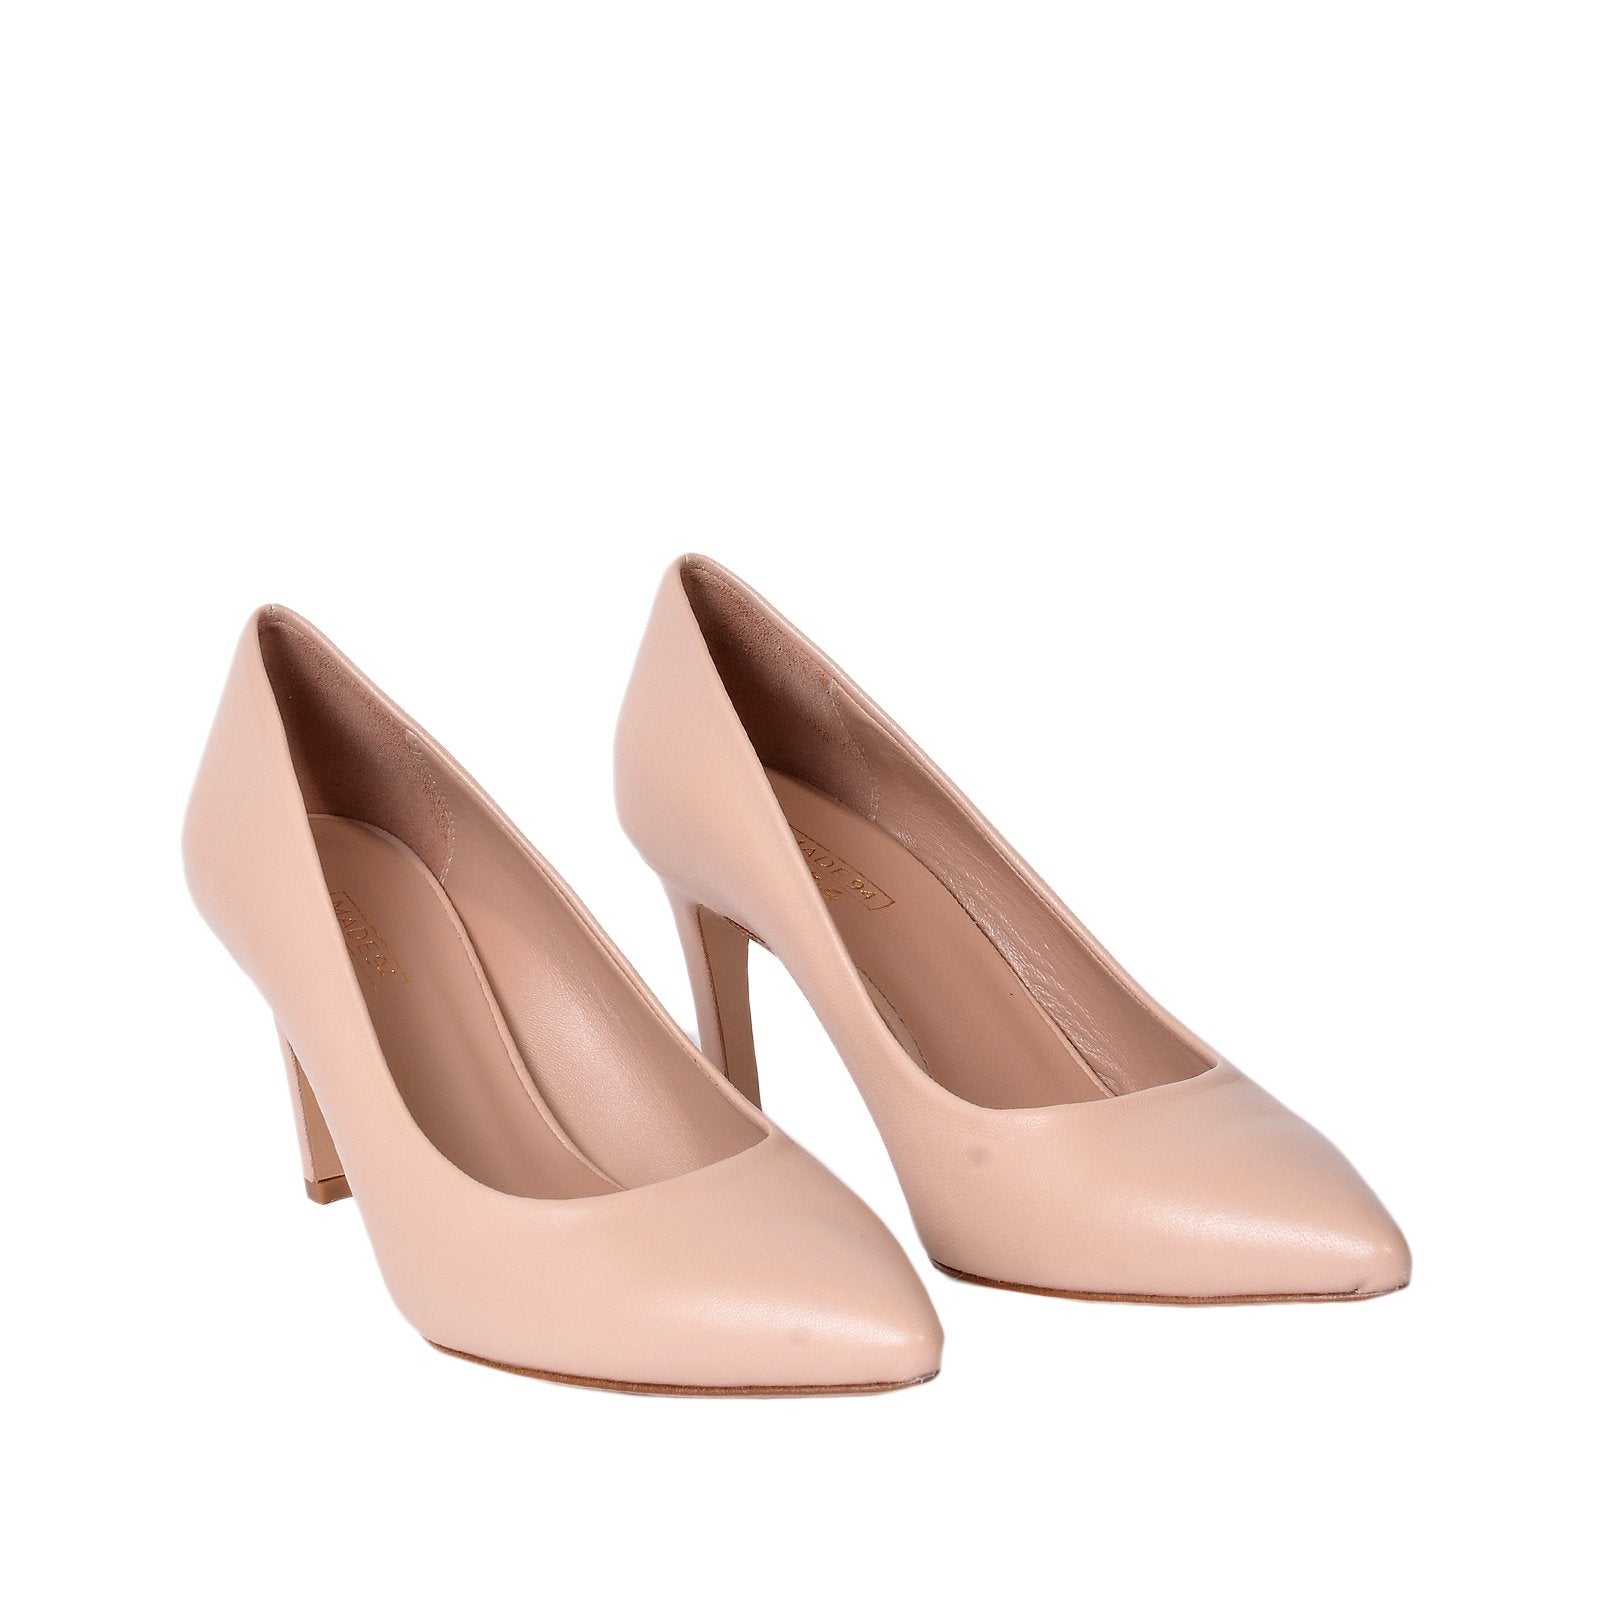 Rosa Nude Leather Pumps Heels 790-004-1 - 2